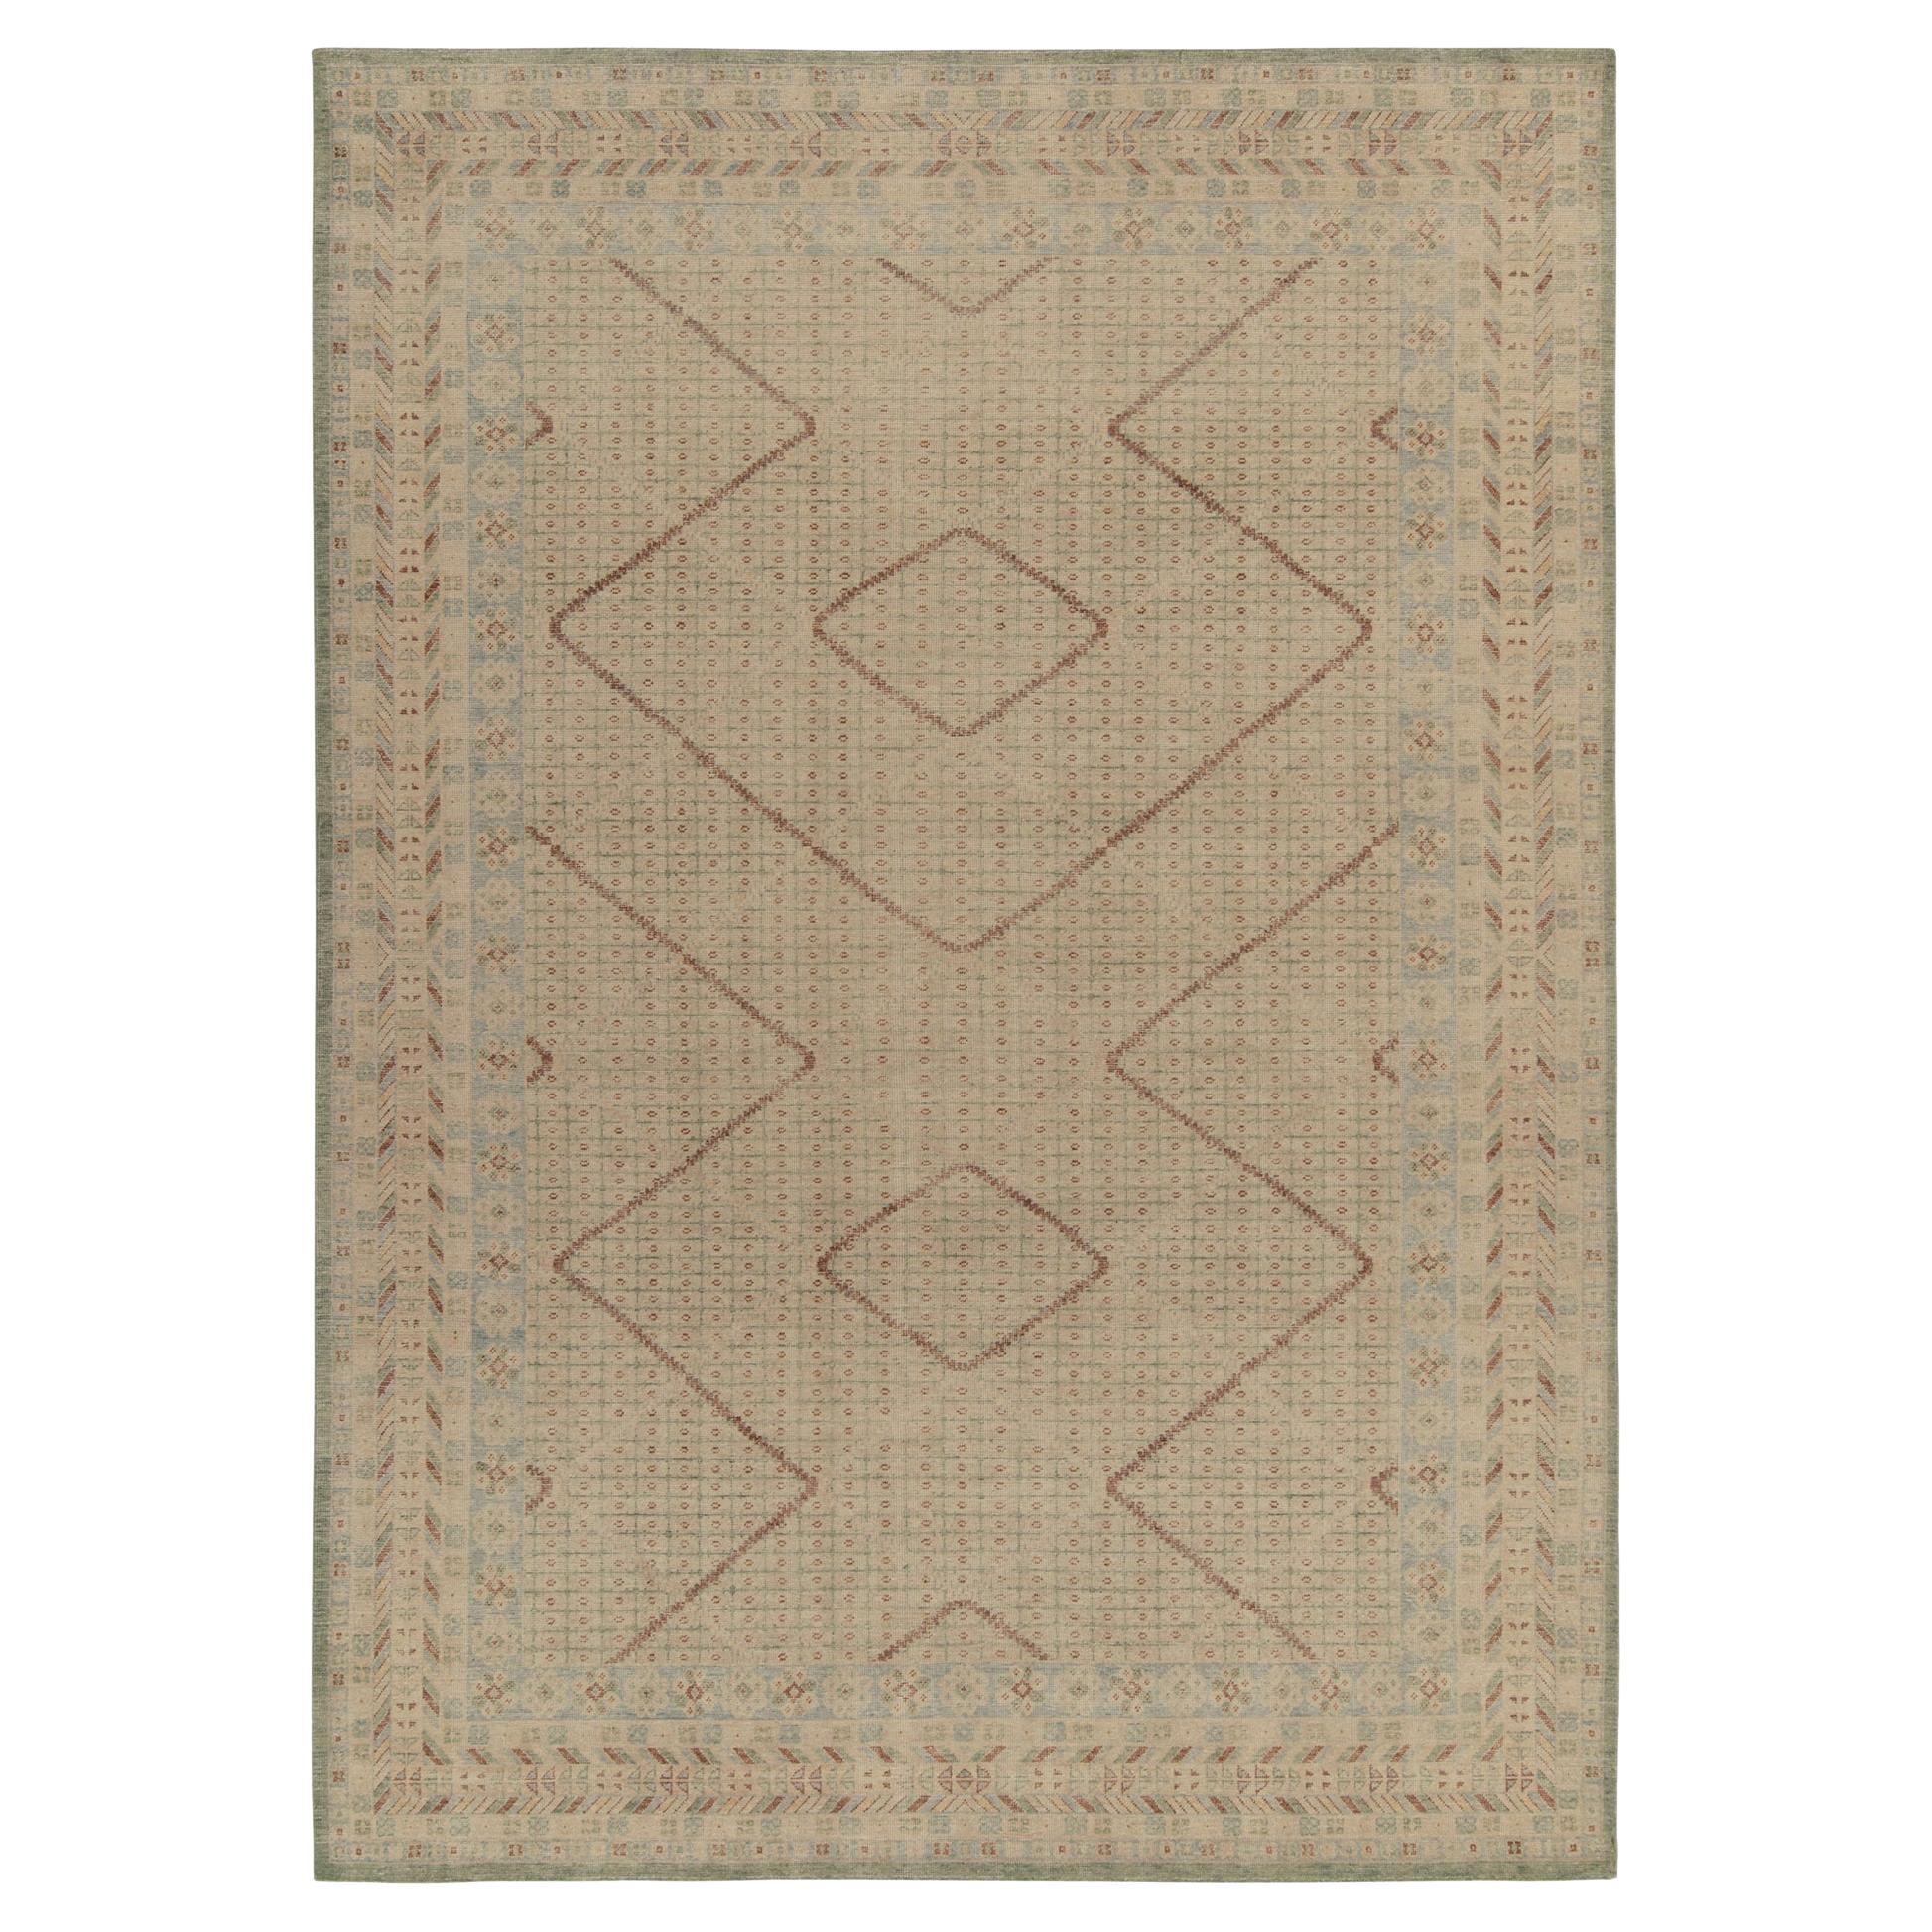 Rug & Kilim’s Distressed Khotan Style Rug in Beige-Brown, Green and Blue Pattern For Sale